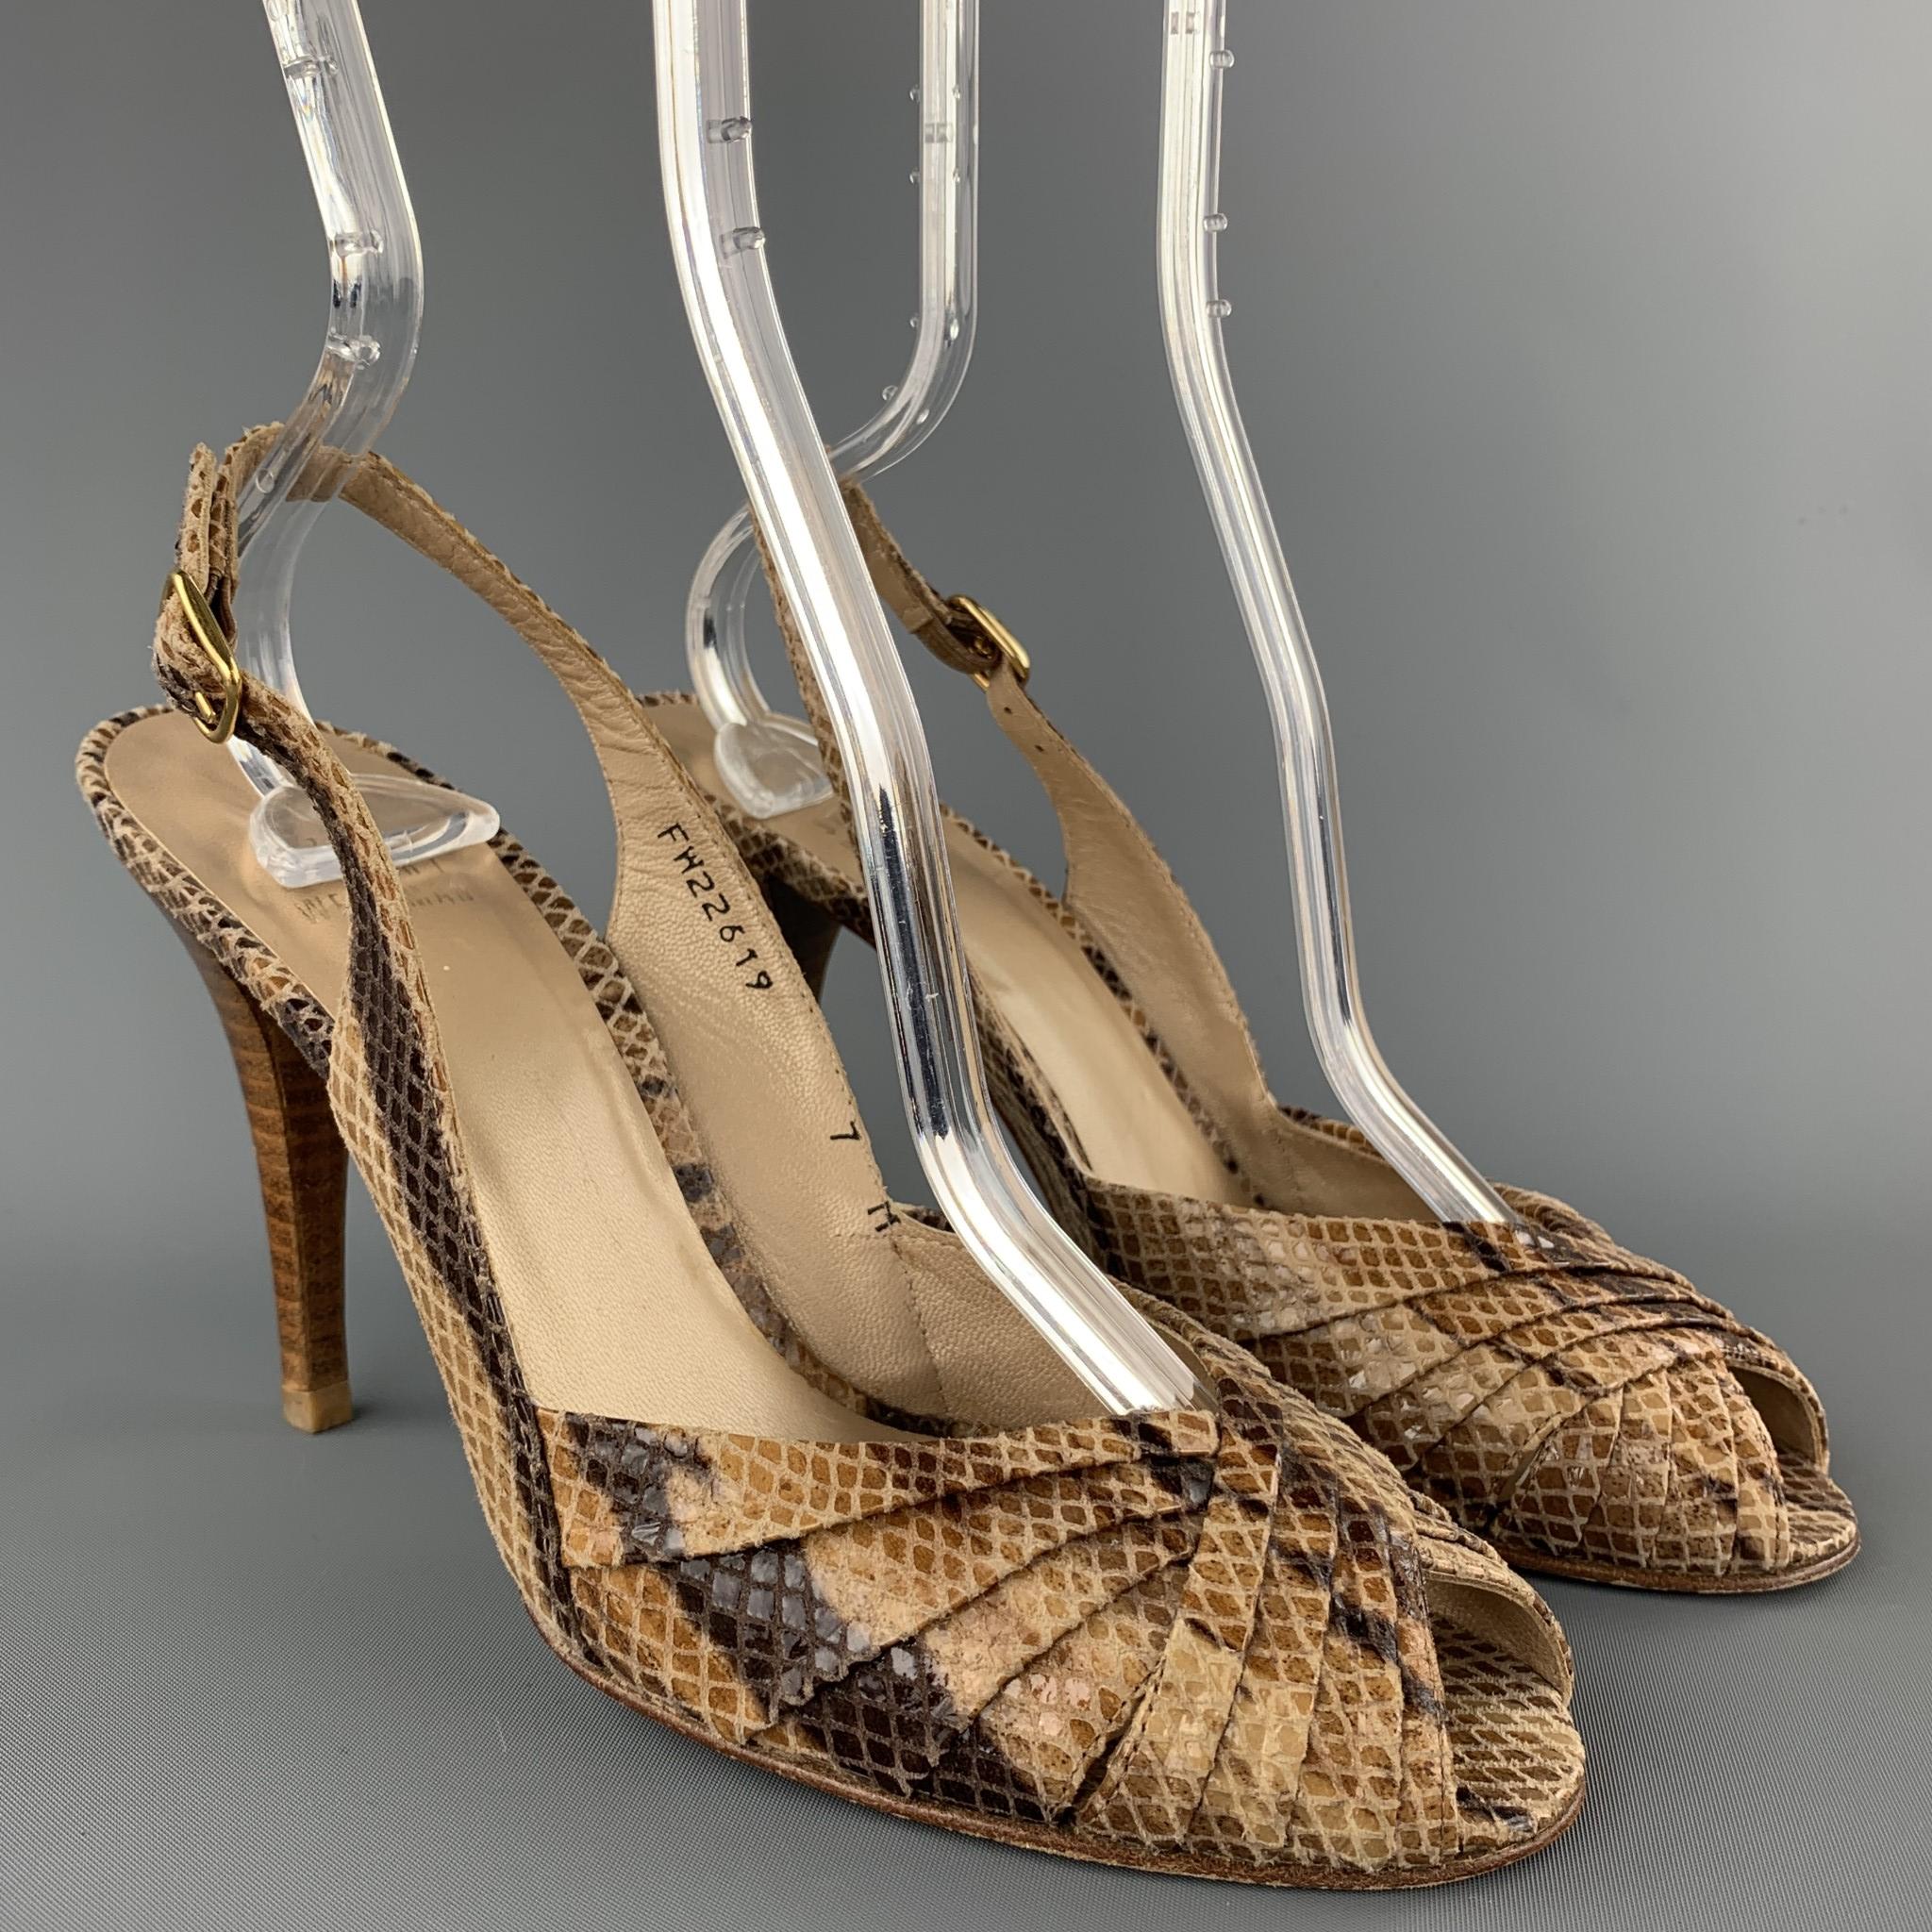 STUART WEITZMAN sandals comes in a beige snake skin print featuring a stacked heel and a slingback strap closure. As-Is.

Good Pre-Owned Condition.
Marked: 7 M

Measurements:

Length: 7.5 in. 
Width: 3 in. 
Heel: 4 in.